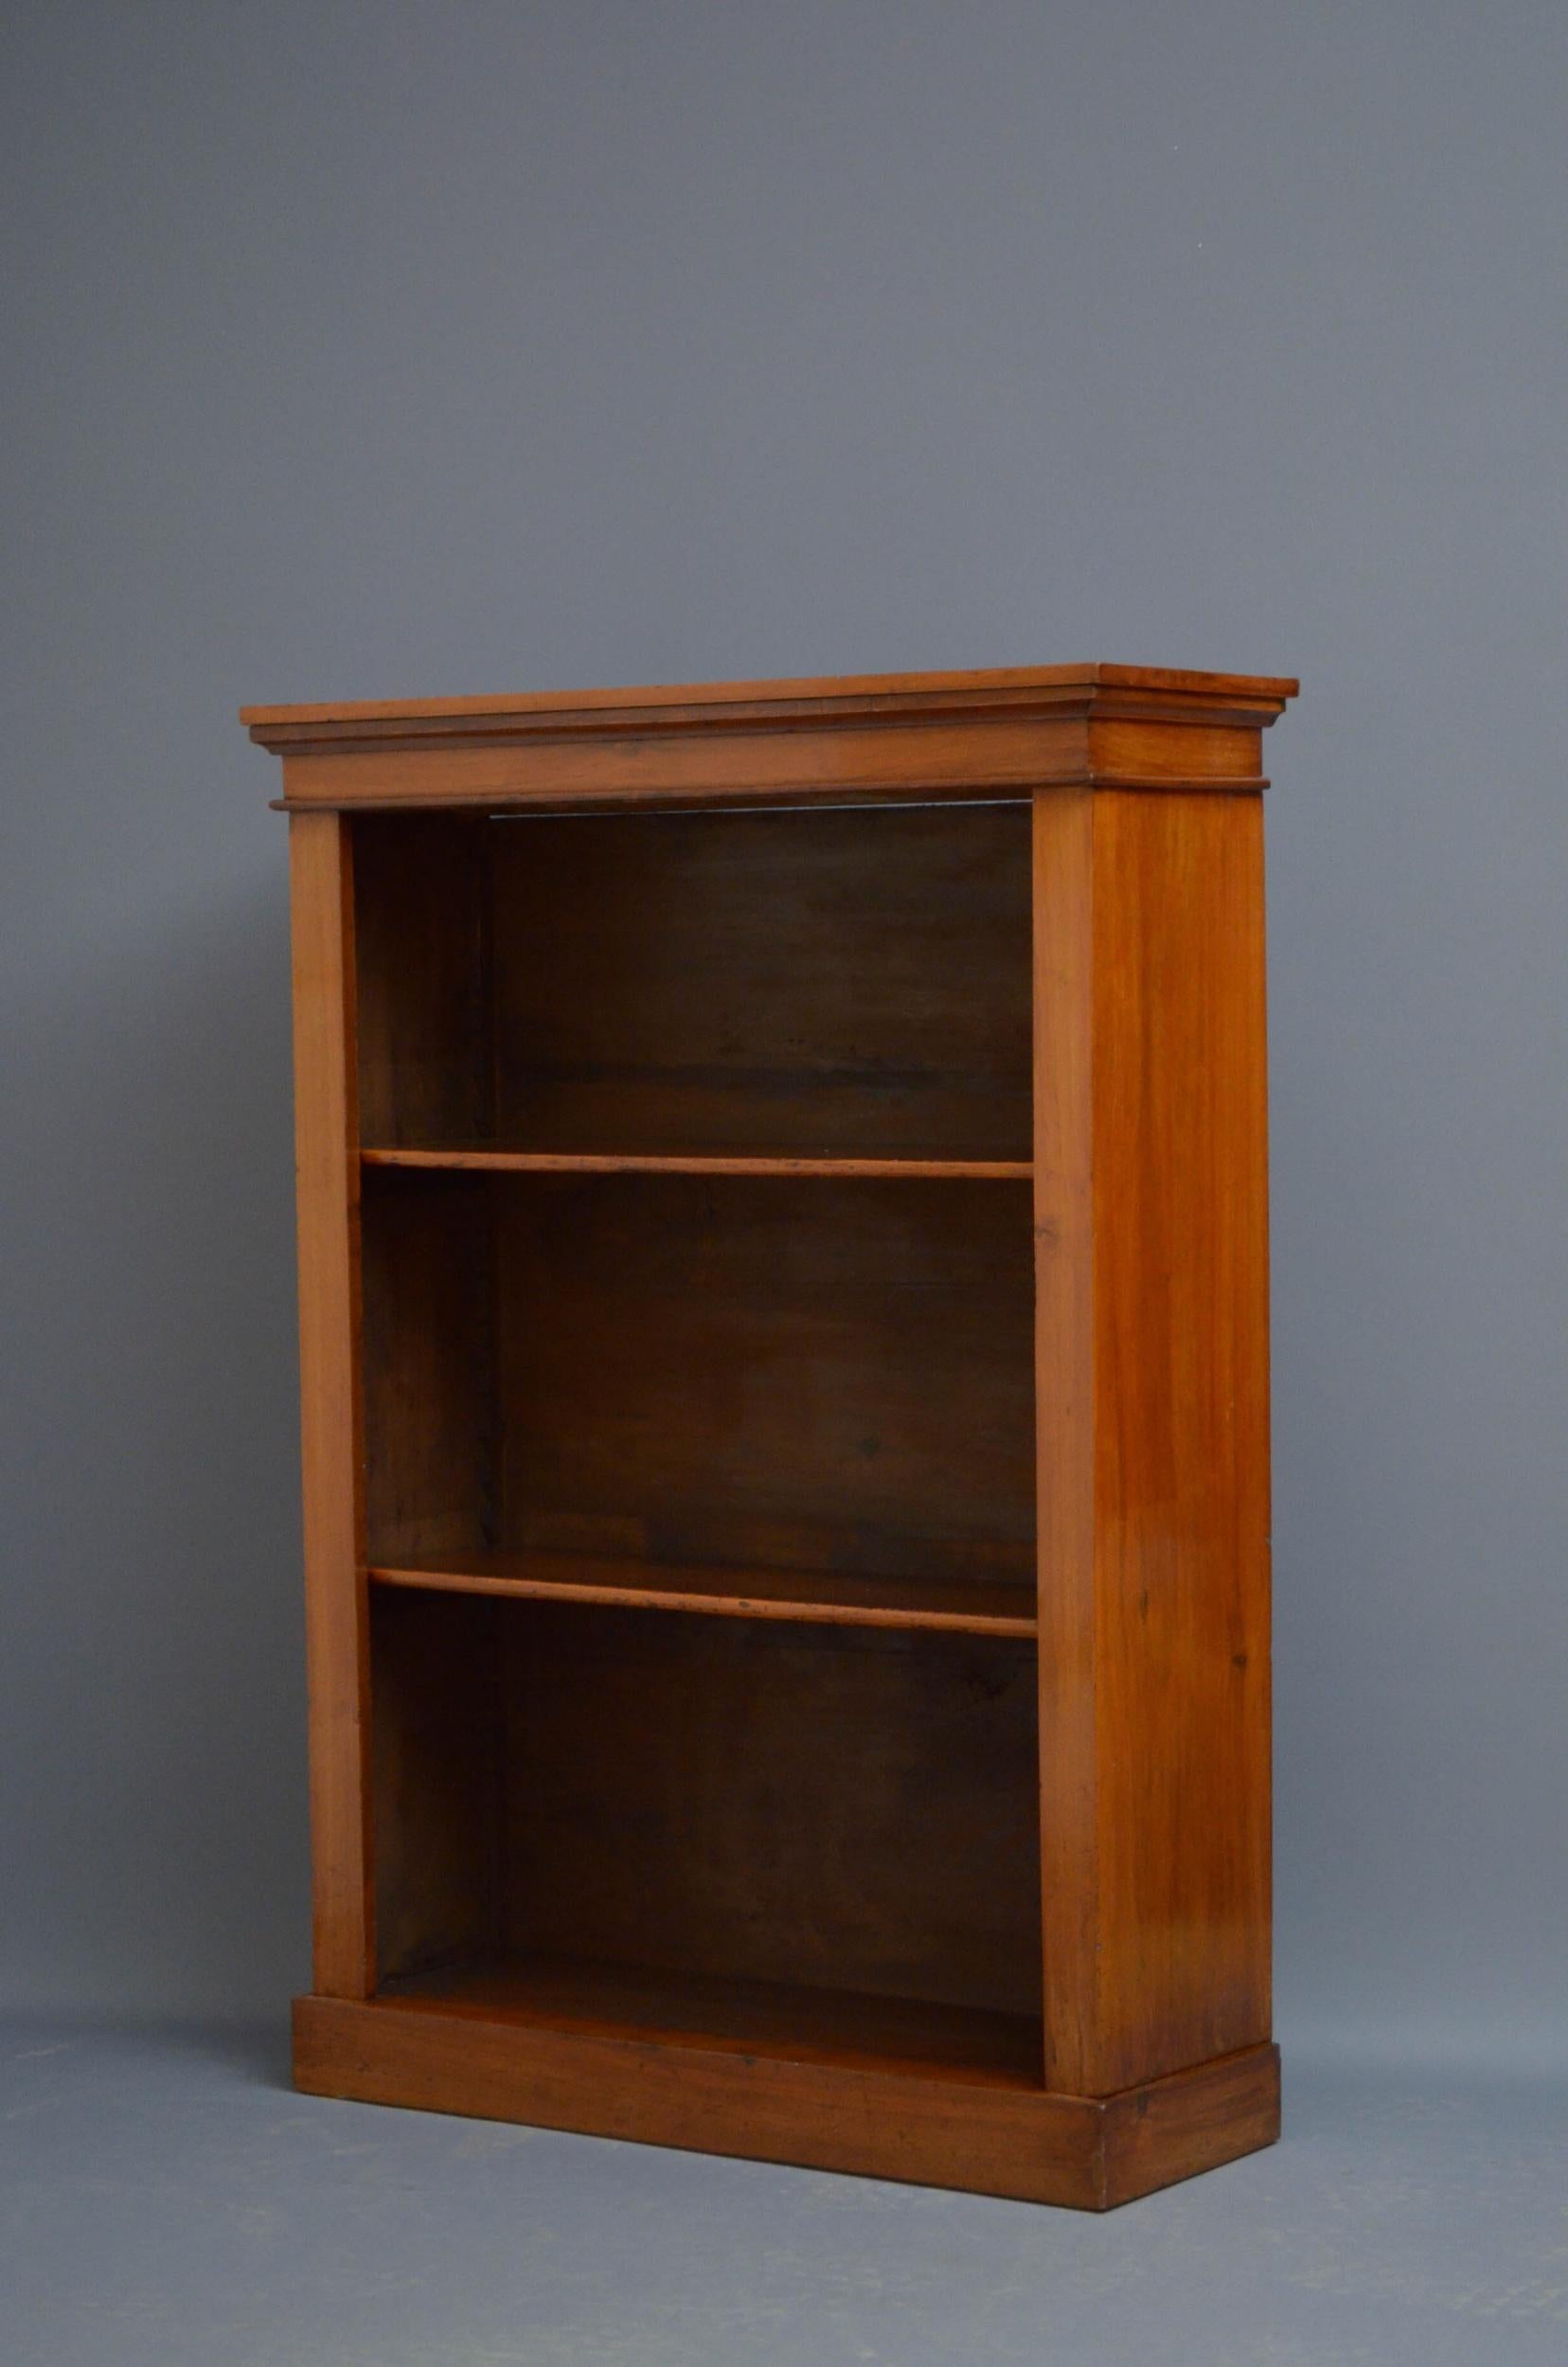 Sn5183 Late Victorian bookcase in walnut, having figured walnut top above two height adjustable shelves, standing on plinth base. This antique bookcase retains its original finish which has been cleaned, revived and waxed, all in excellent home